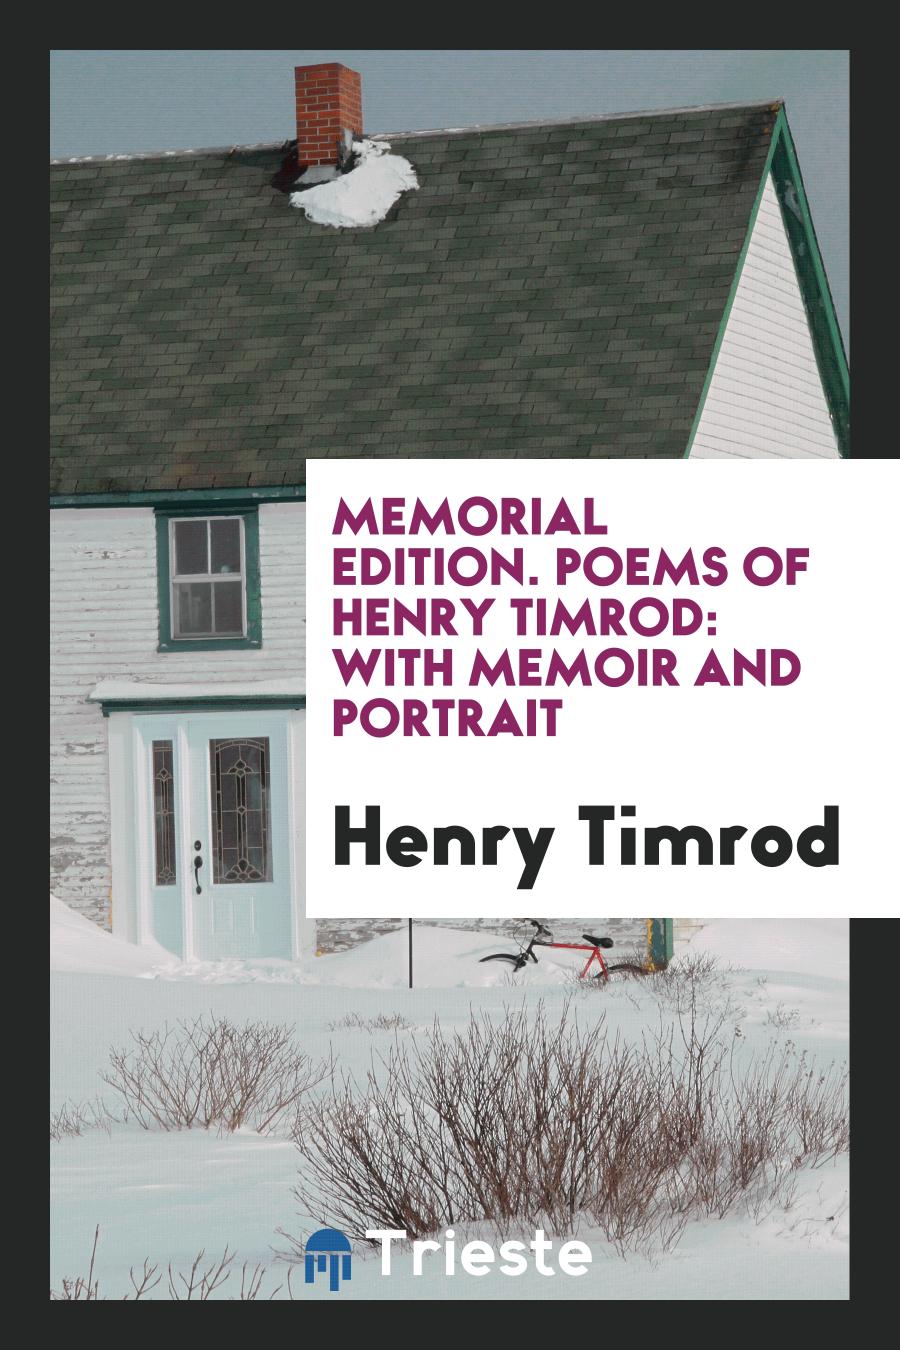 Memorial Edition. Poems of Henry Timrod: With Memoir and Portrait